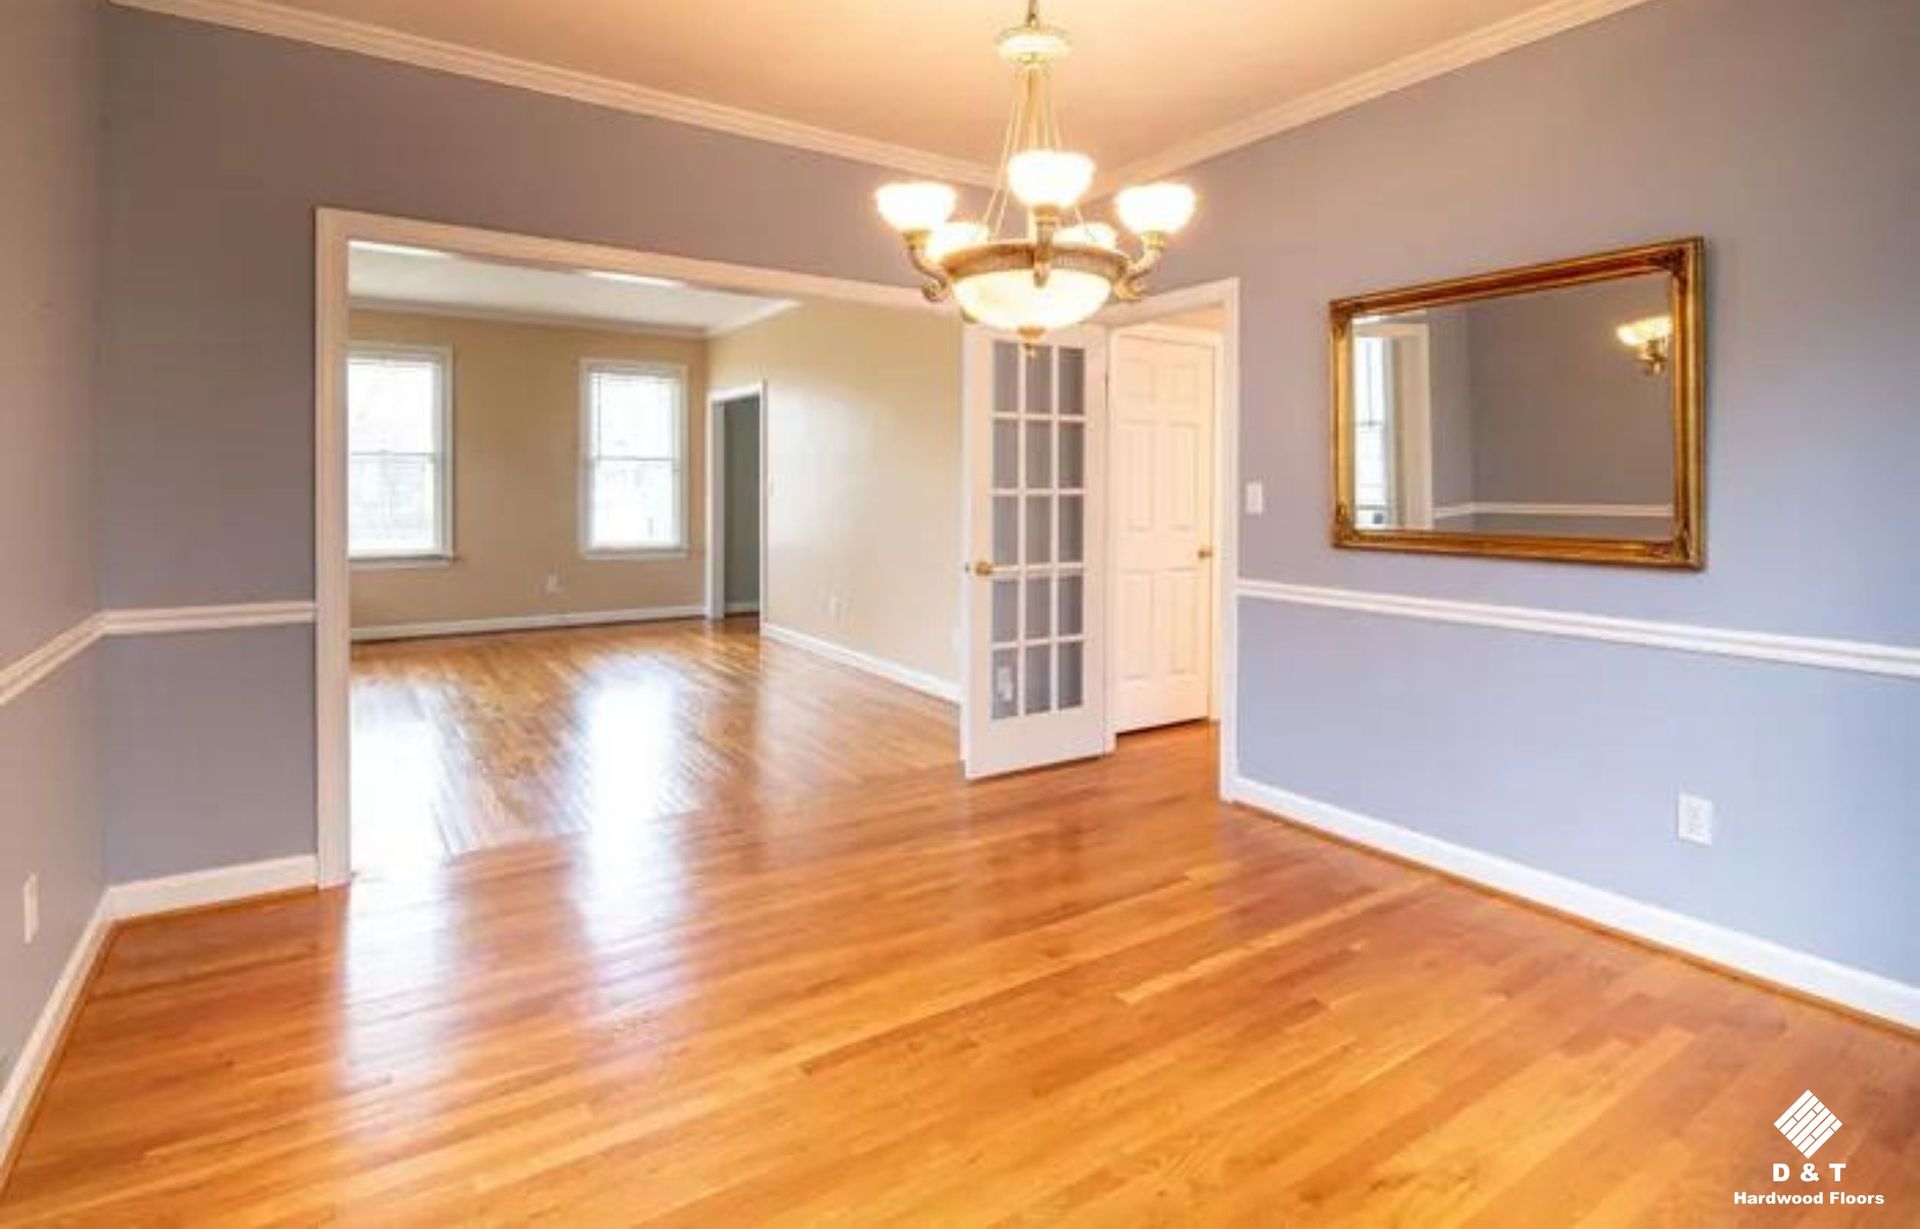 beautiful house in Portland Maine with newly installed hardwood floors